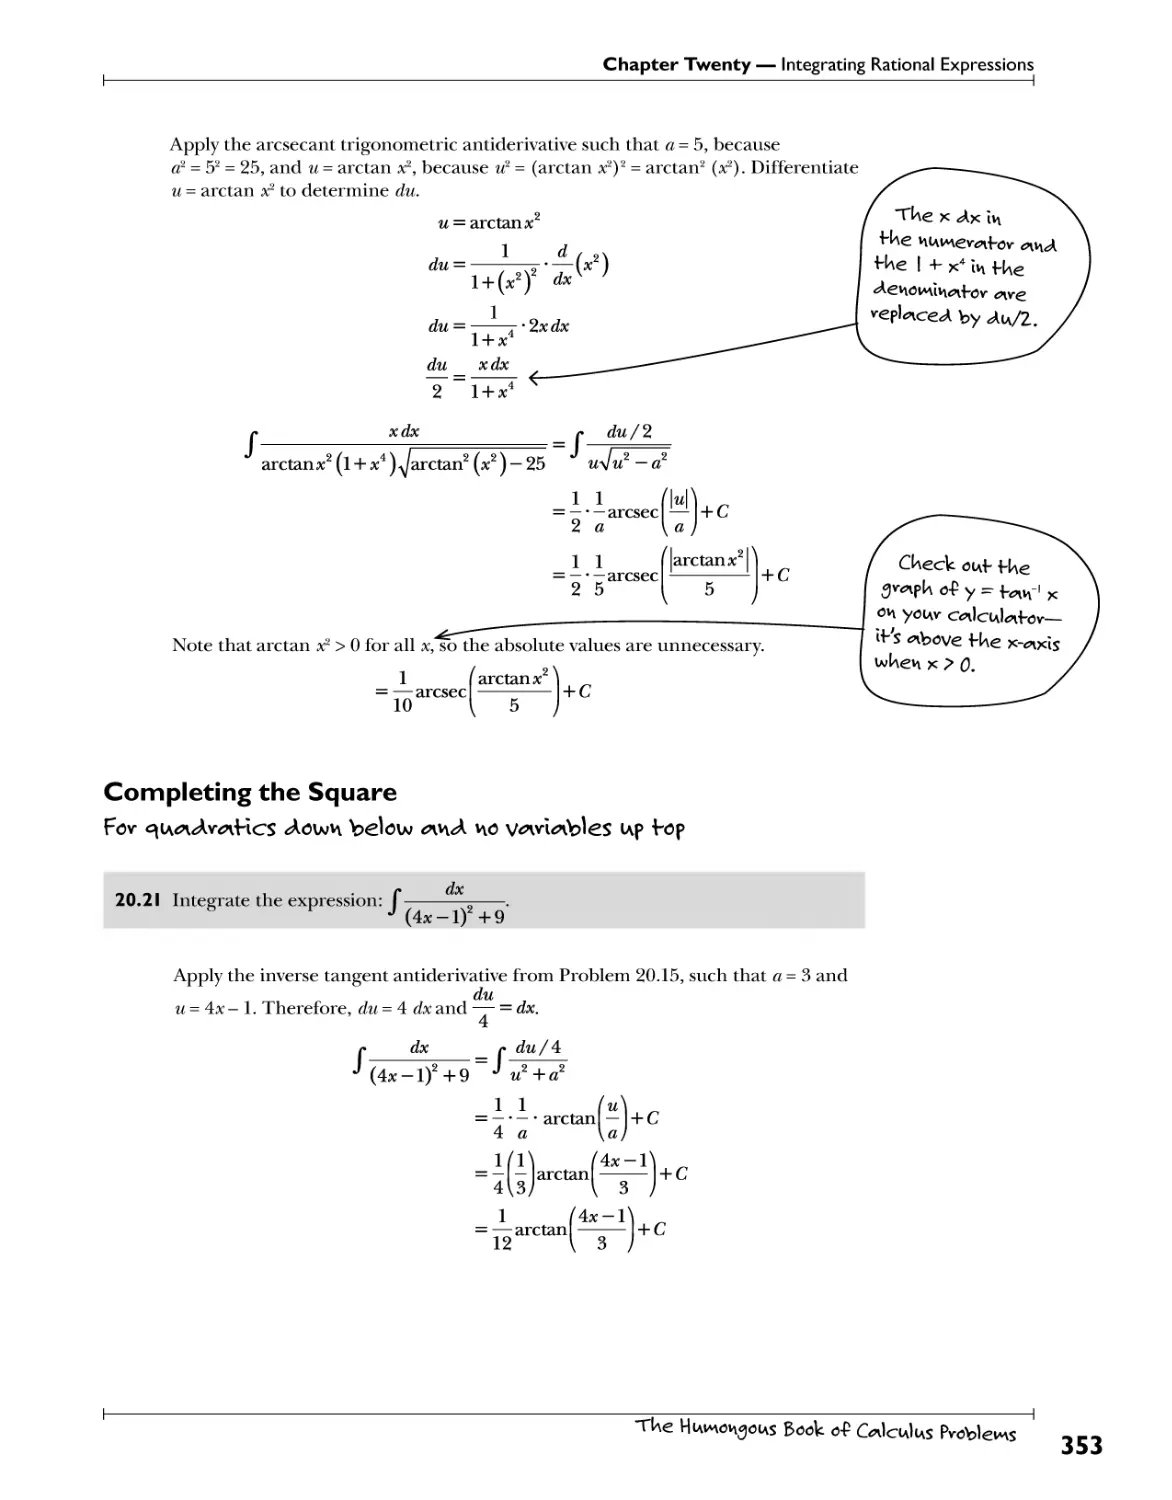 Completing the Square 353